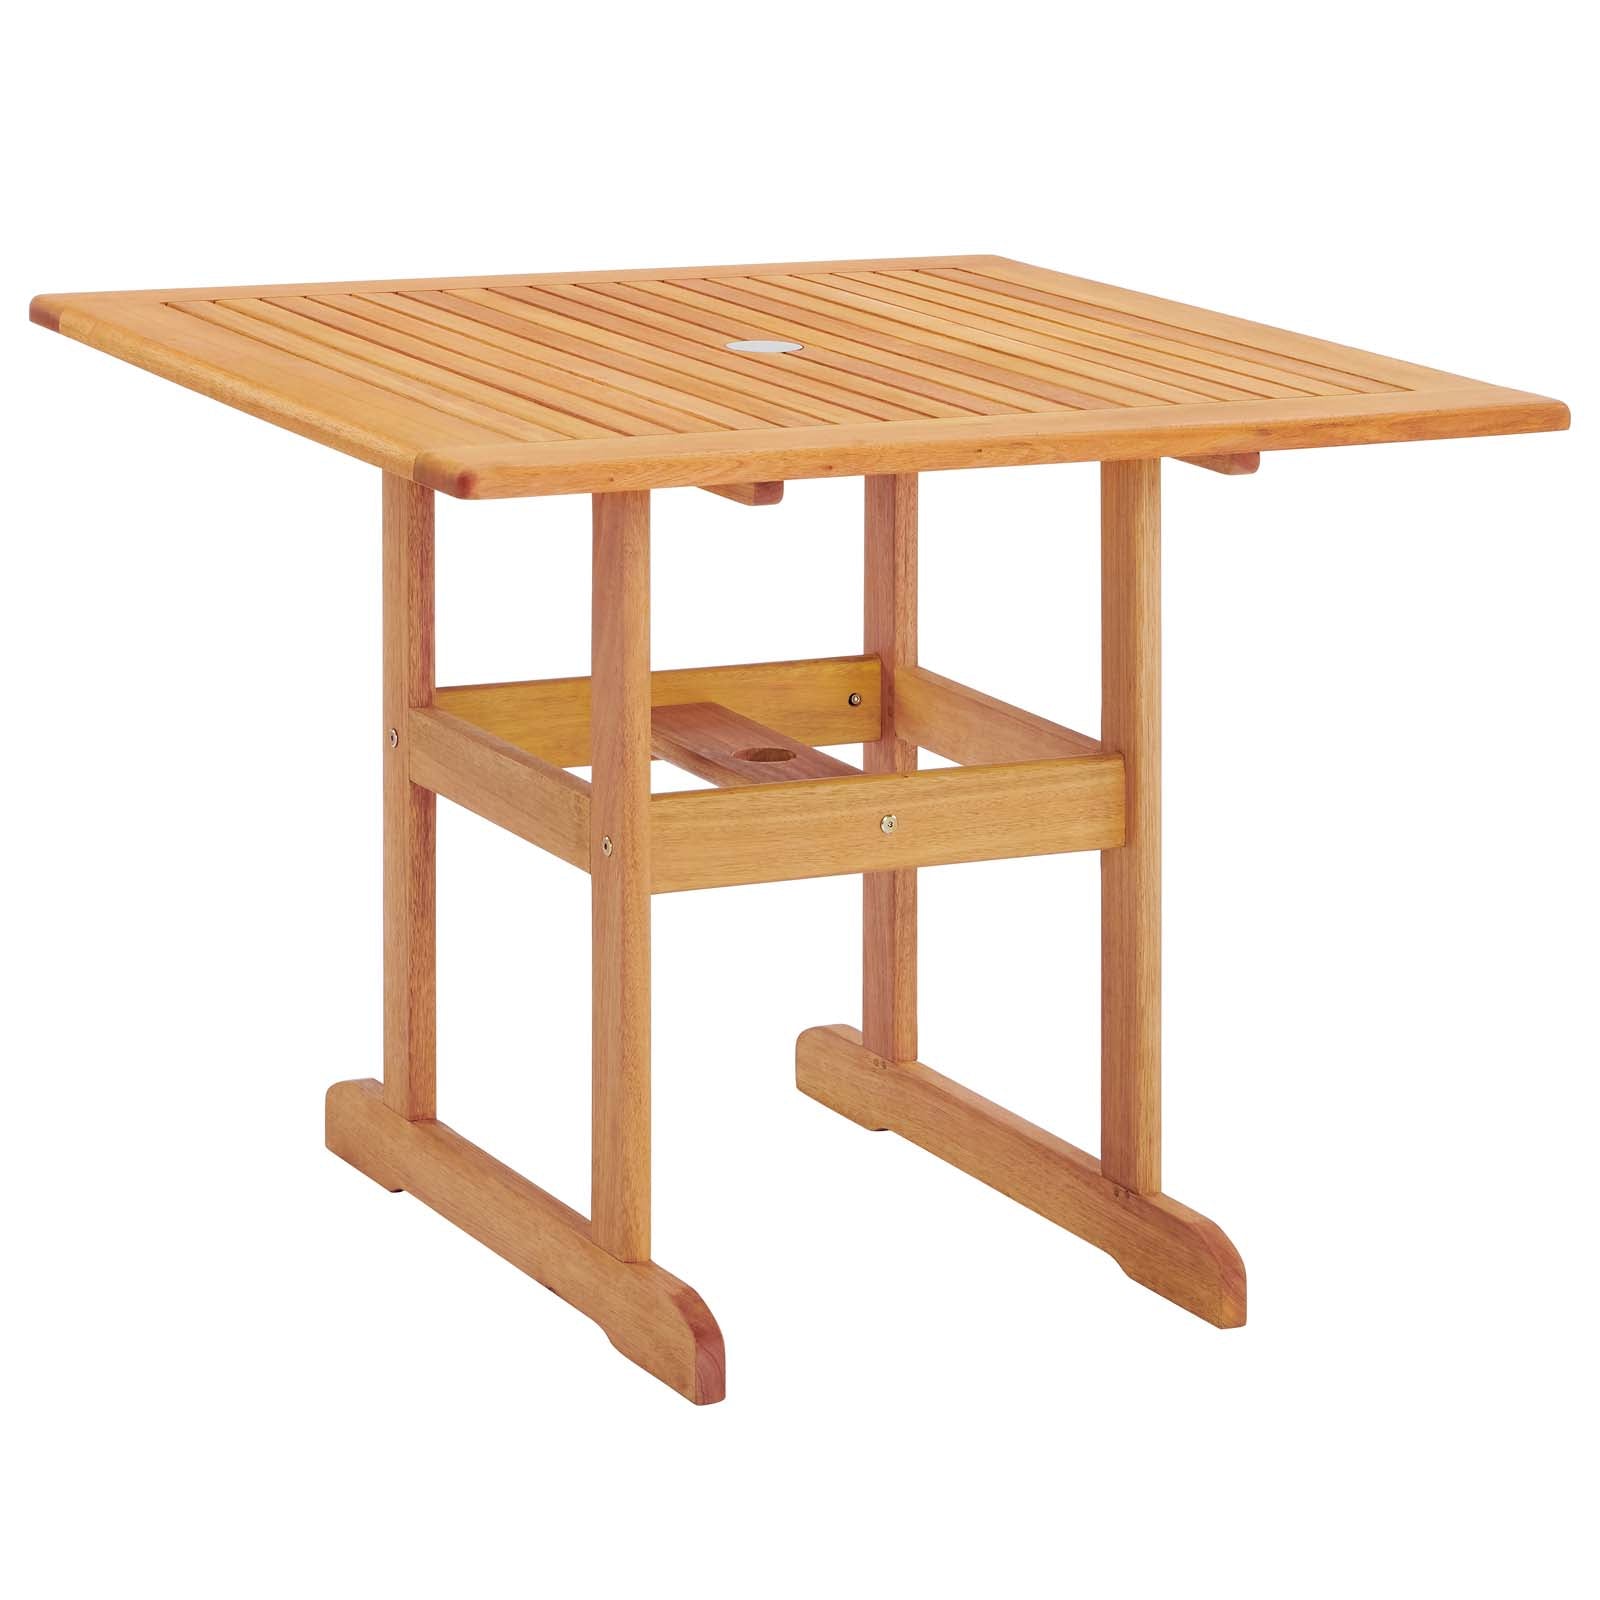 Hatteras 36" Square Outdoor Patio Eucalyptus Wood Dining Table - East Shore Modern Home Furnishings